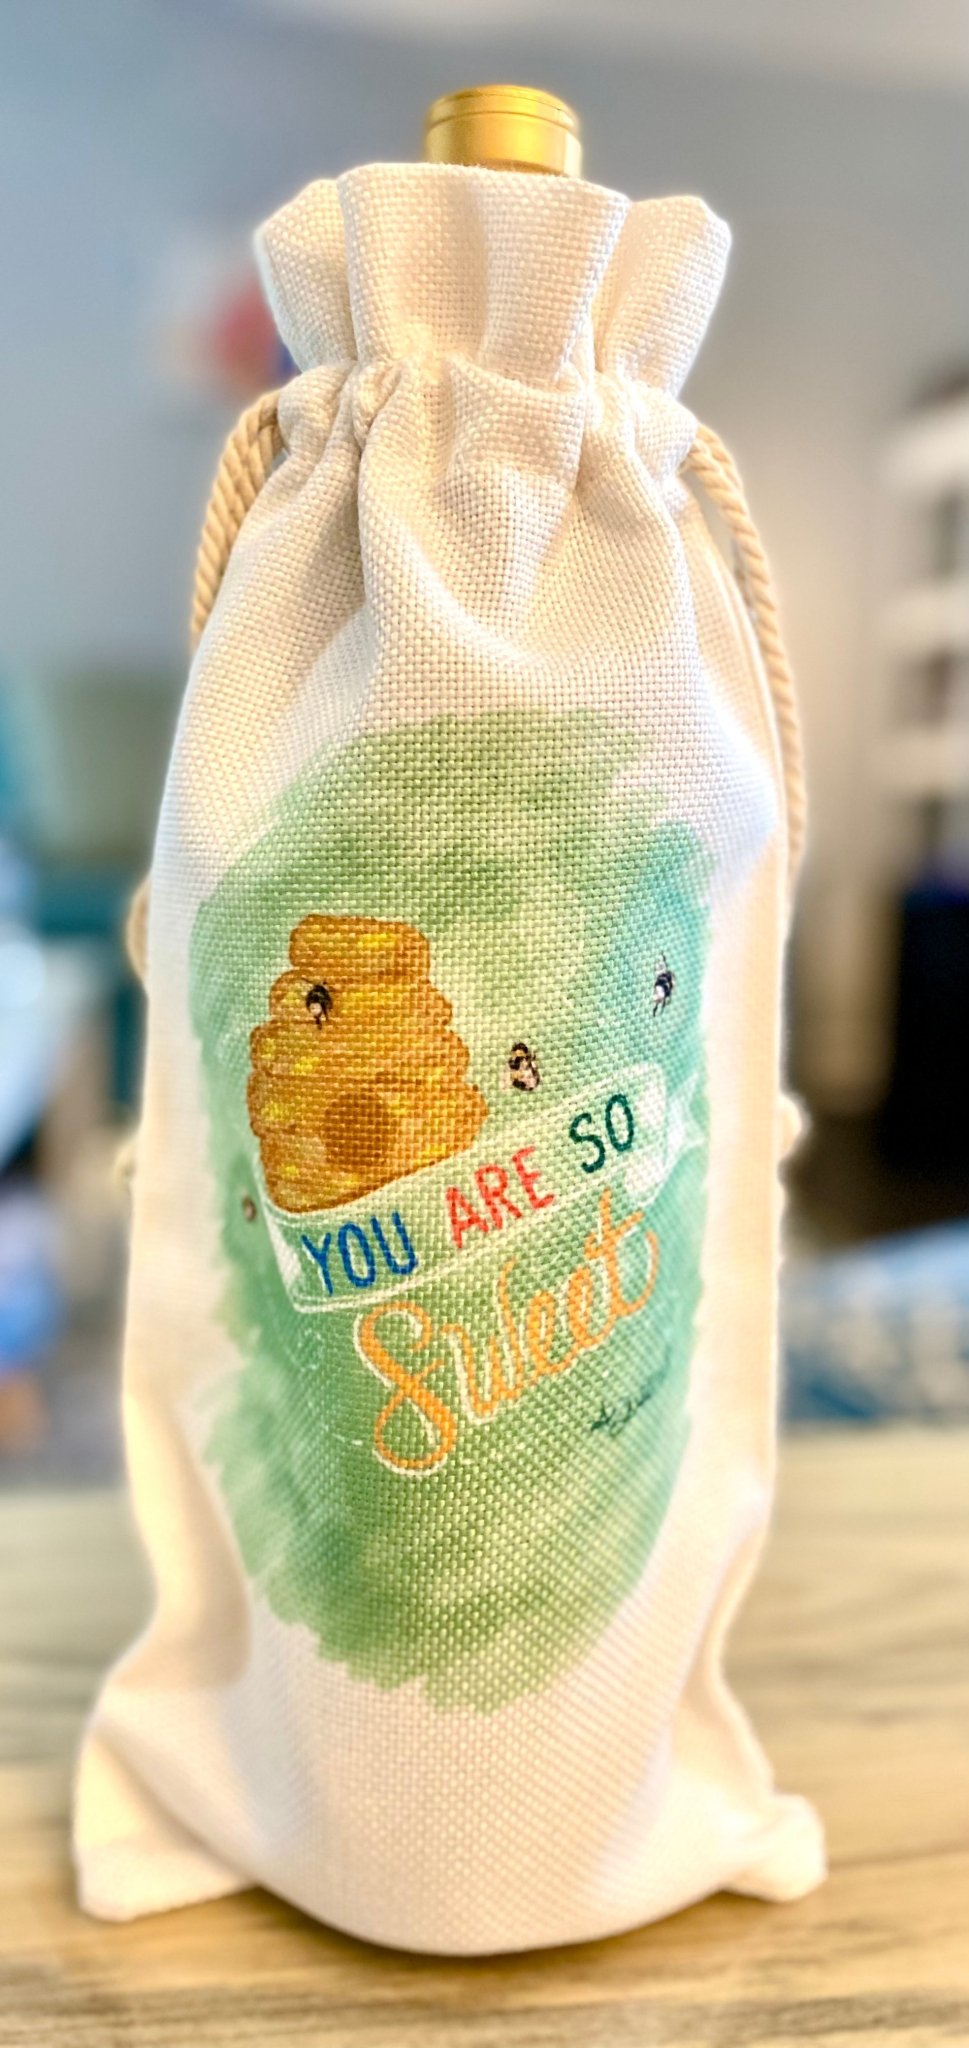 You are so Sweet Wine Bag - Blue Cava